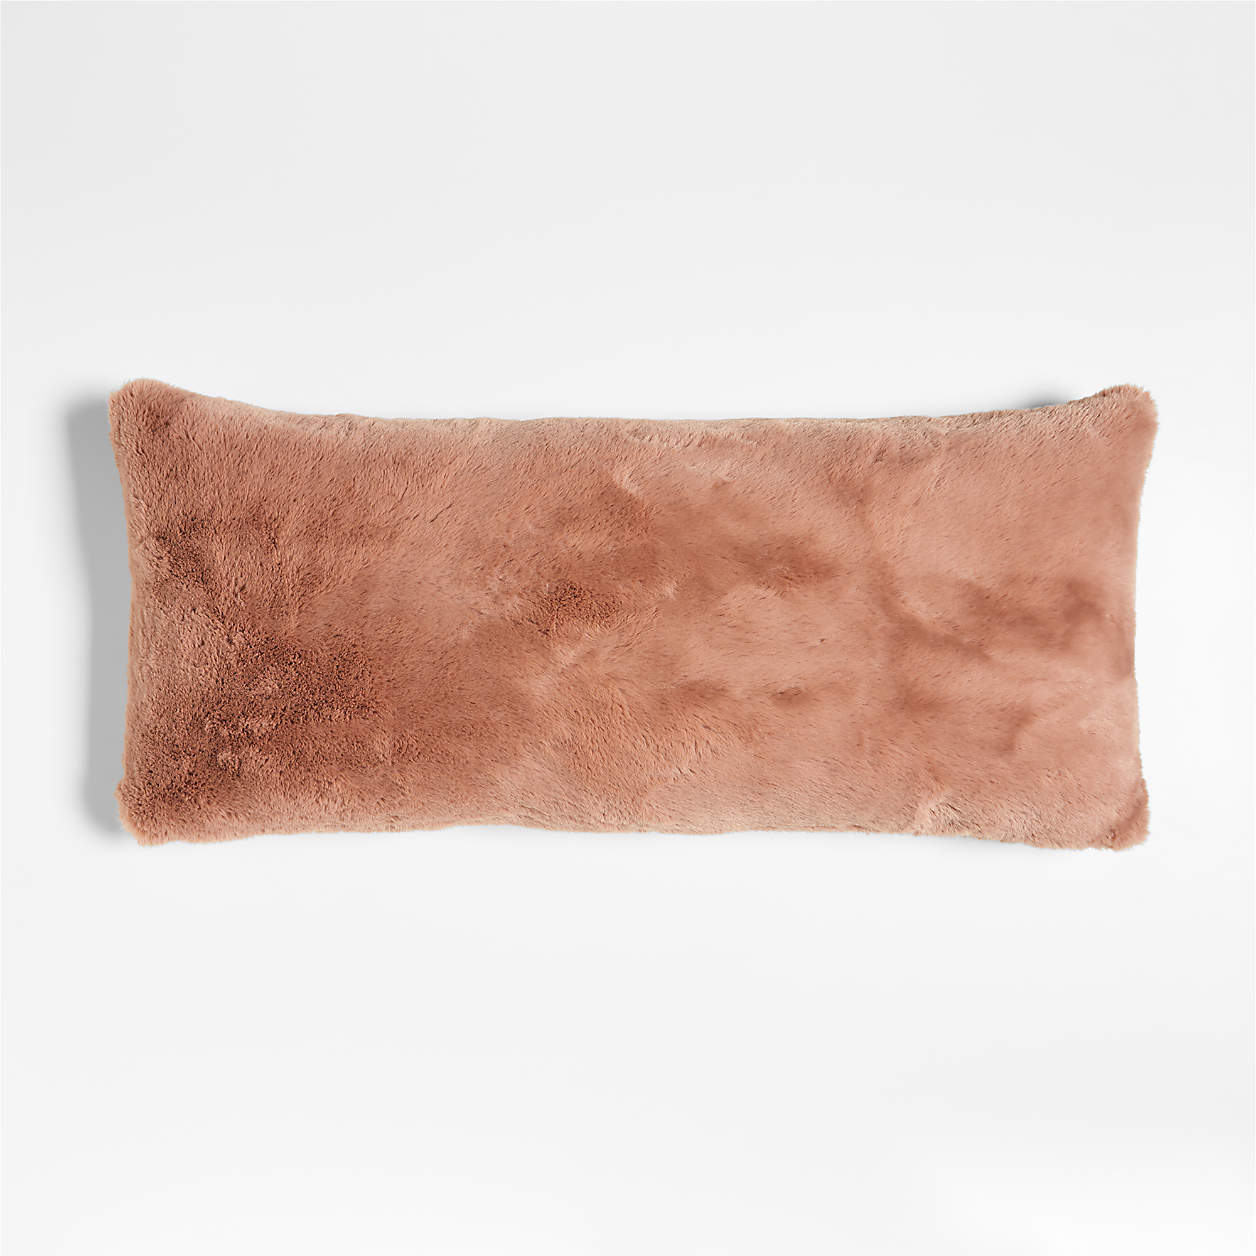 Brulee Brown Faux Fur 23"x23" Throw Pillow Cover